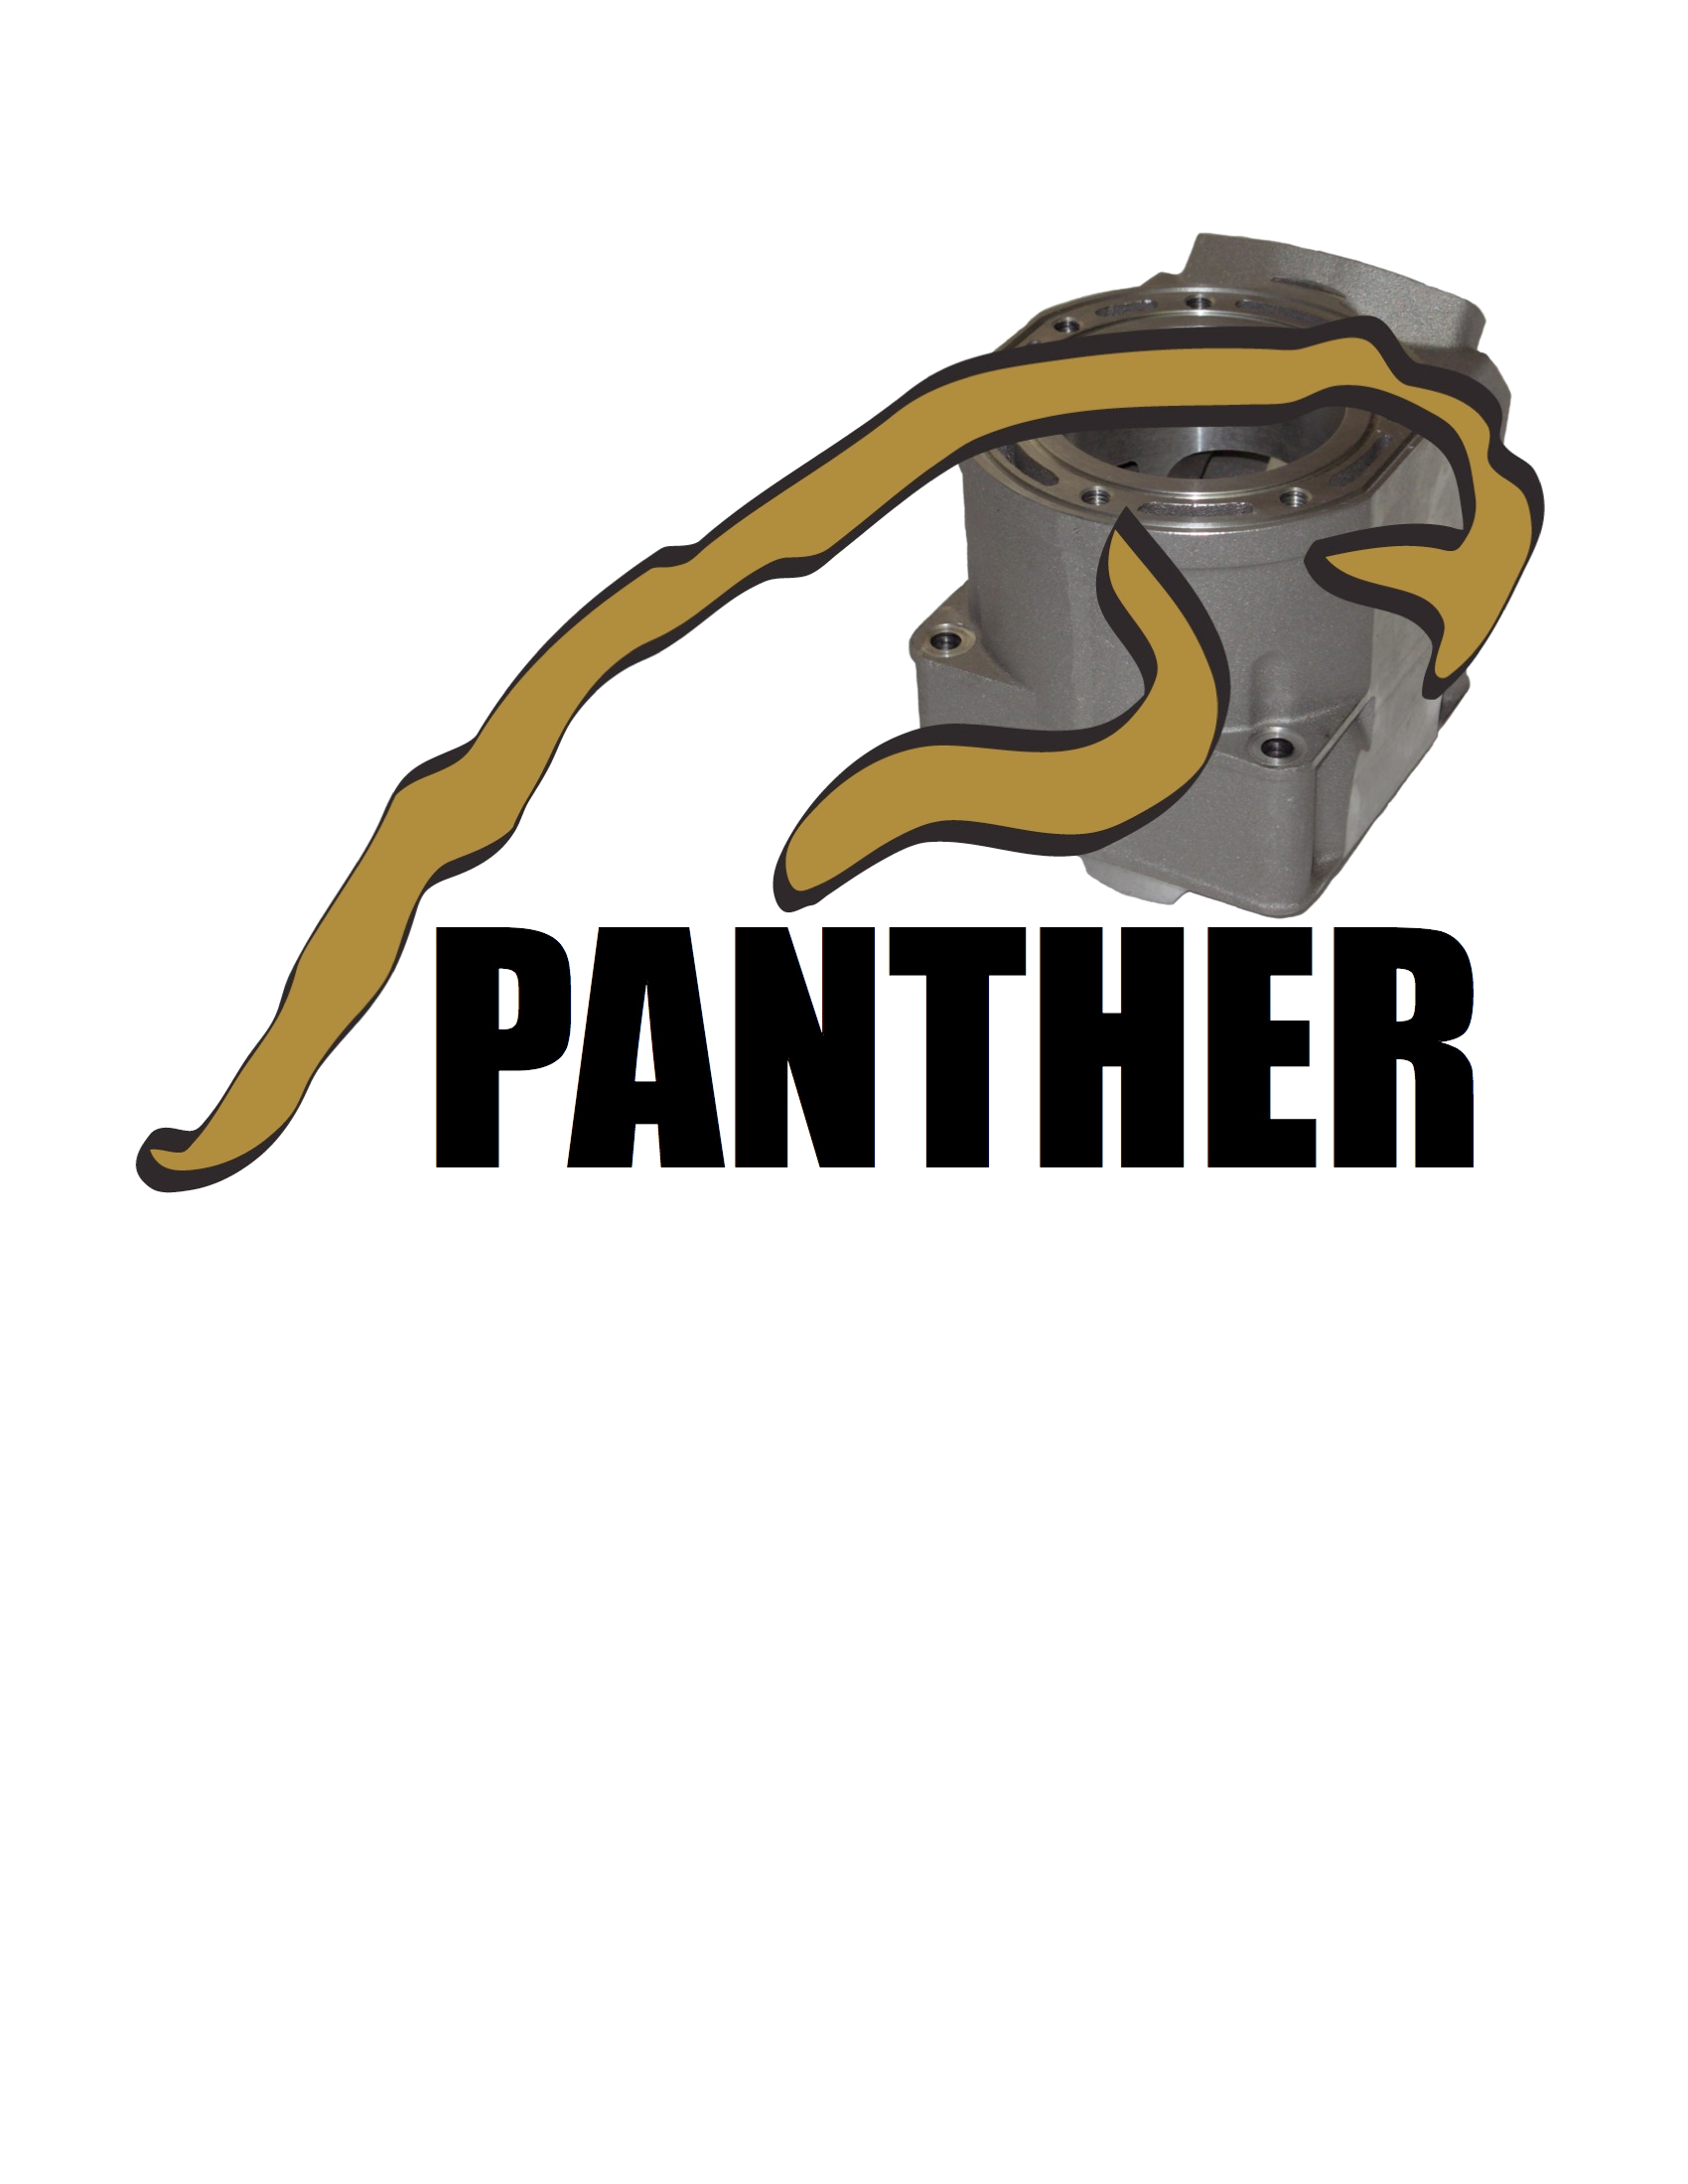 Panther_logo_clear